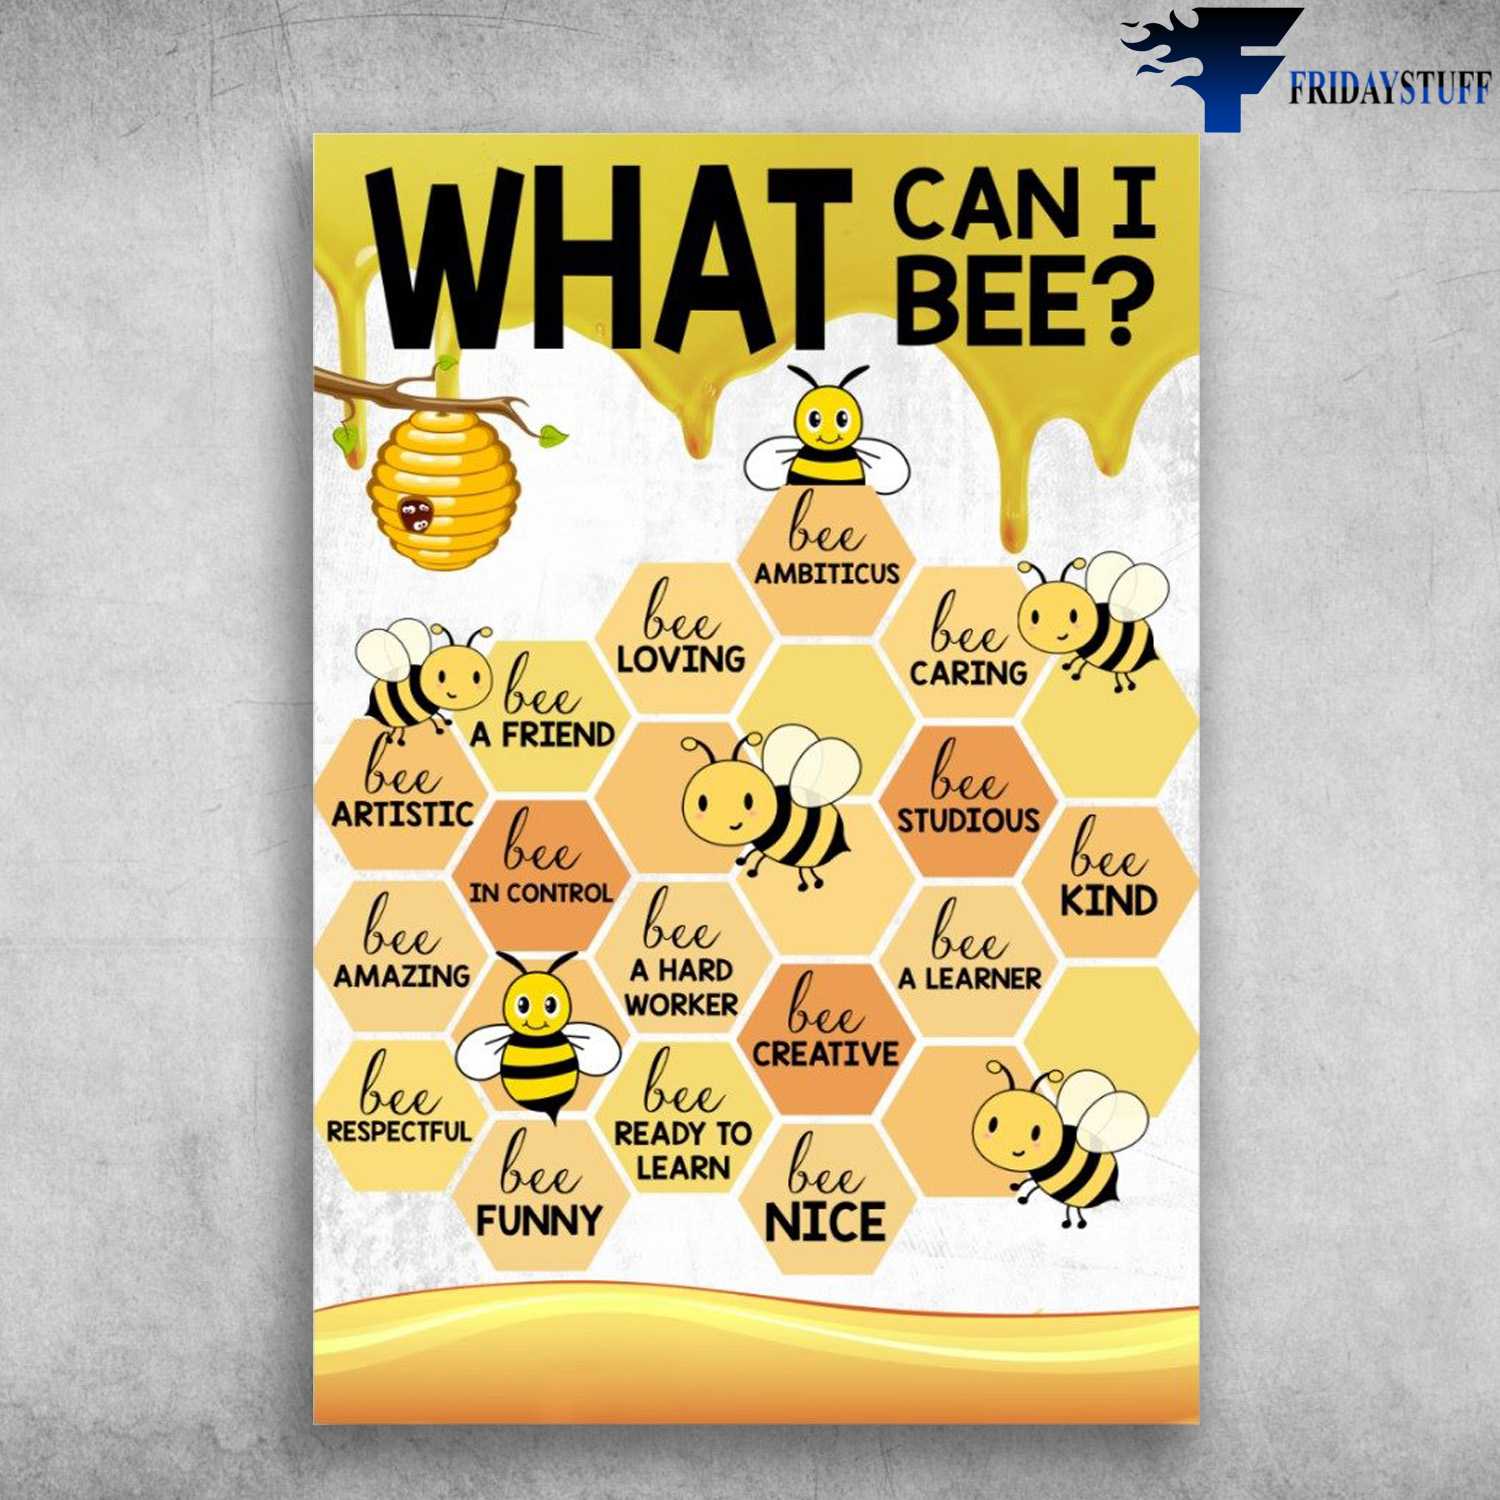 Bee Lover - What Can I Bee, Bee Amniticus, Bee Loving, Bee Caring, Be Friend, Be Studious, Be Kind, Be Artistic, Be In Control, Bee Funny